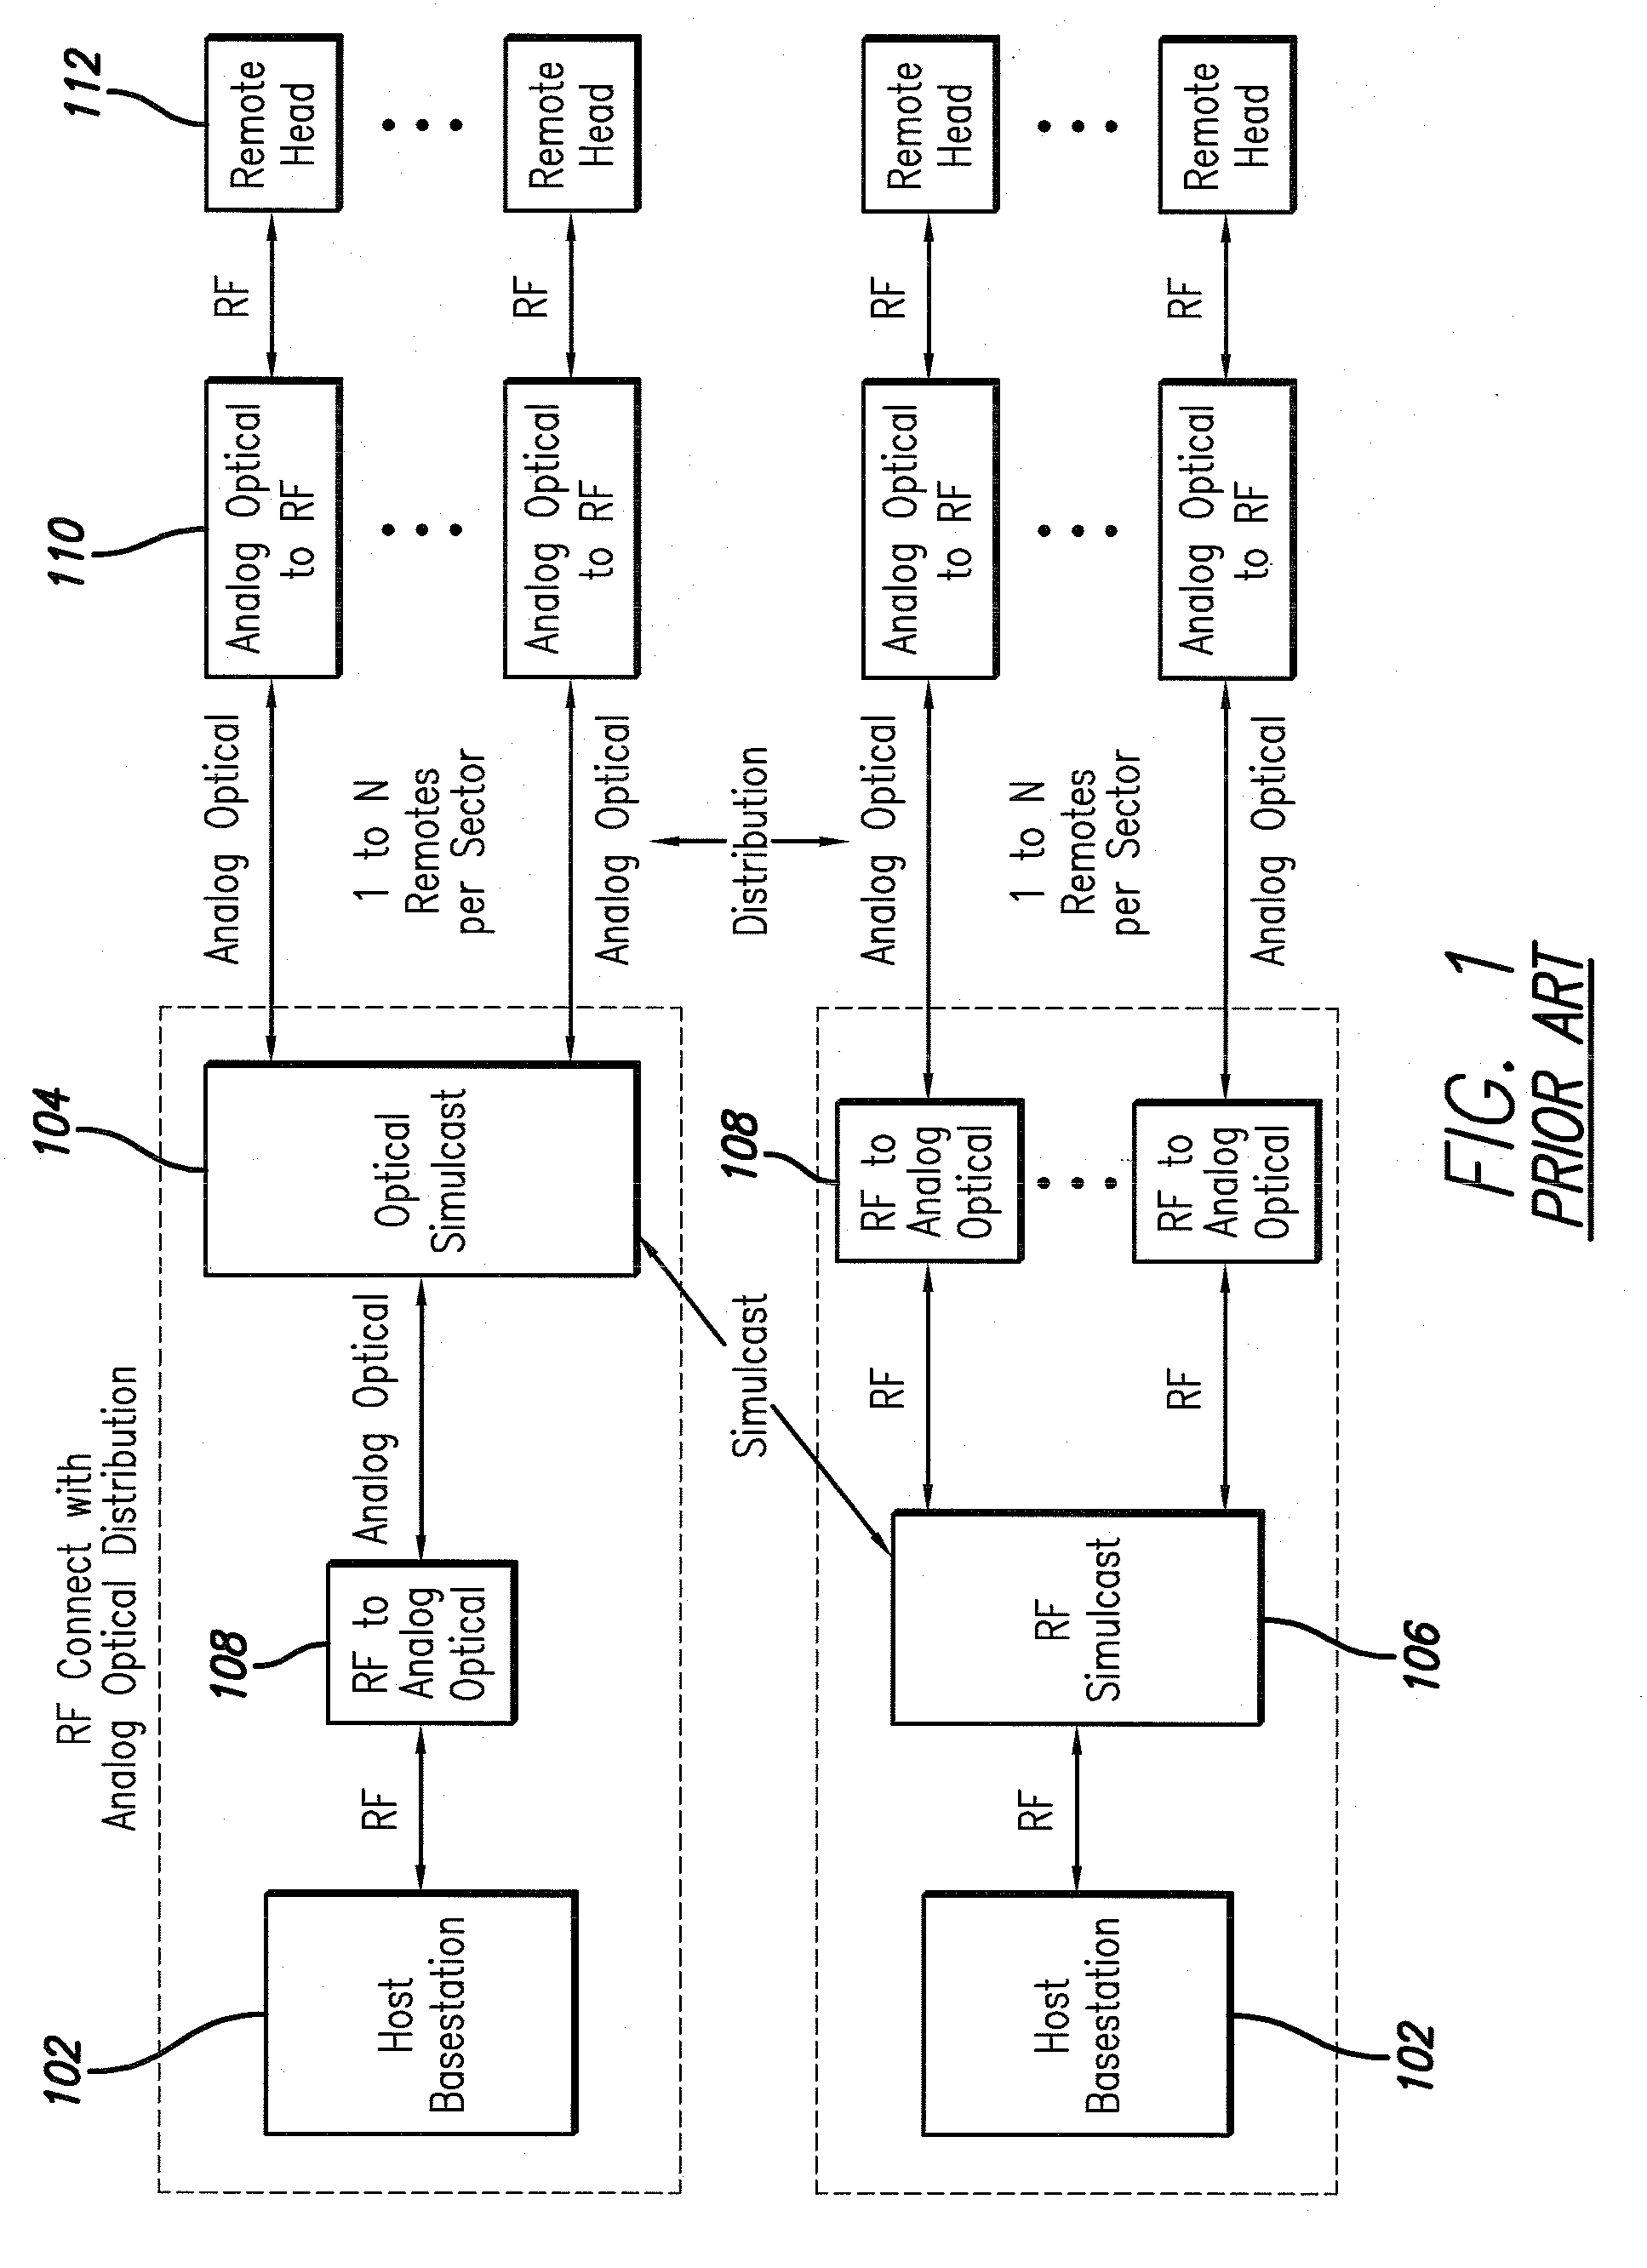 Digital distributed antenna system